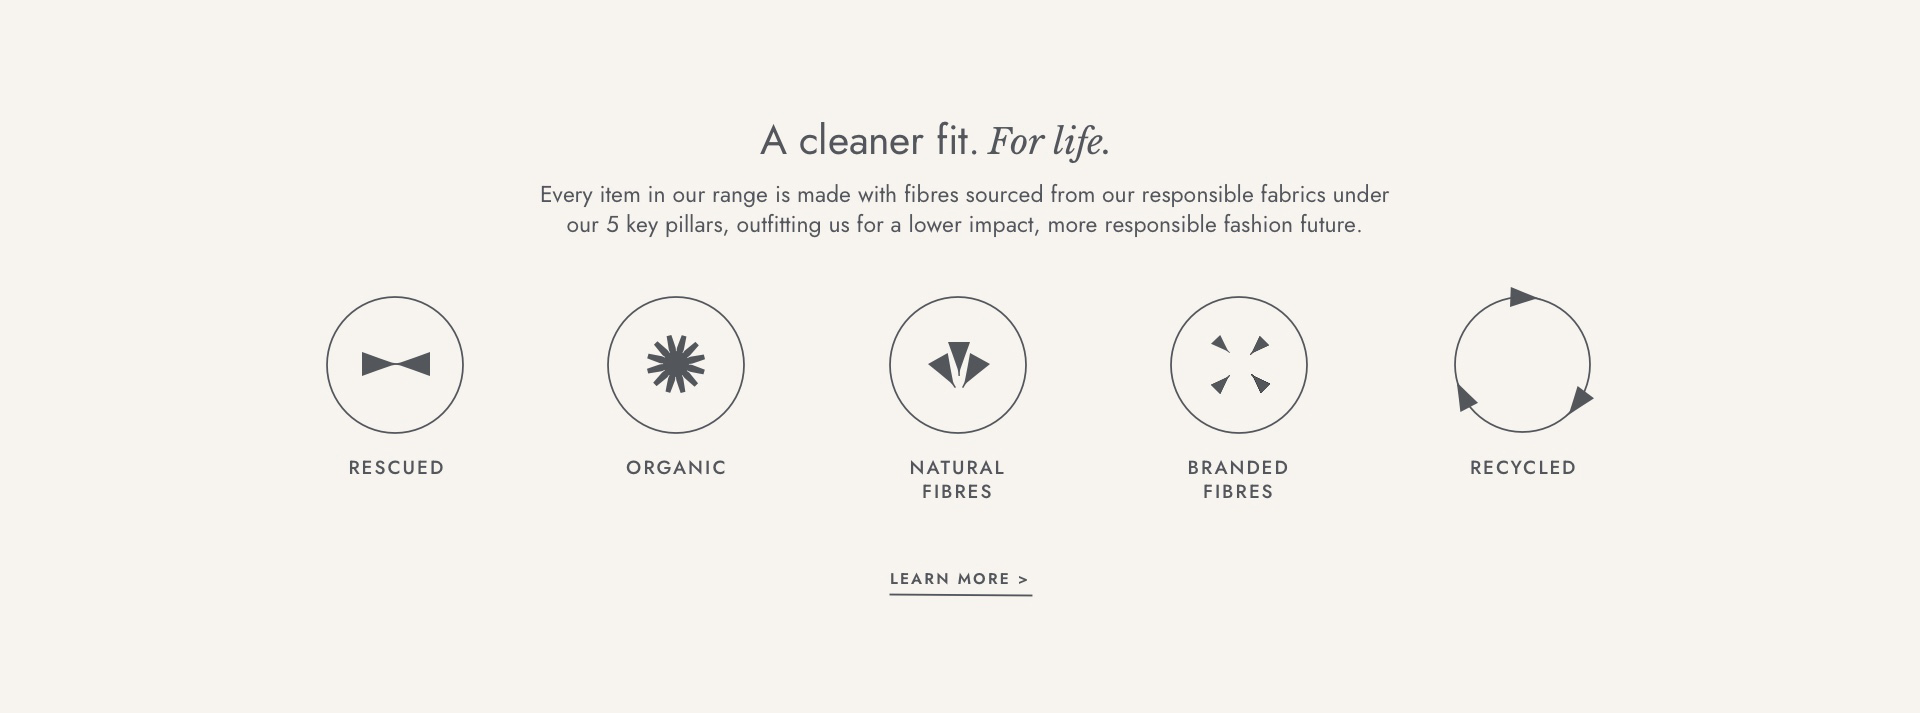 A cleaner fit. For life. Read more.